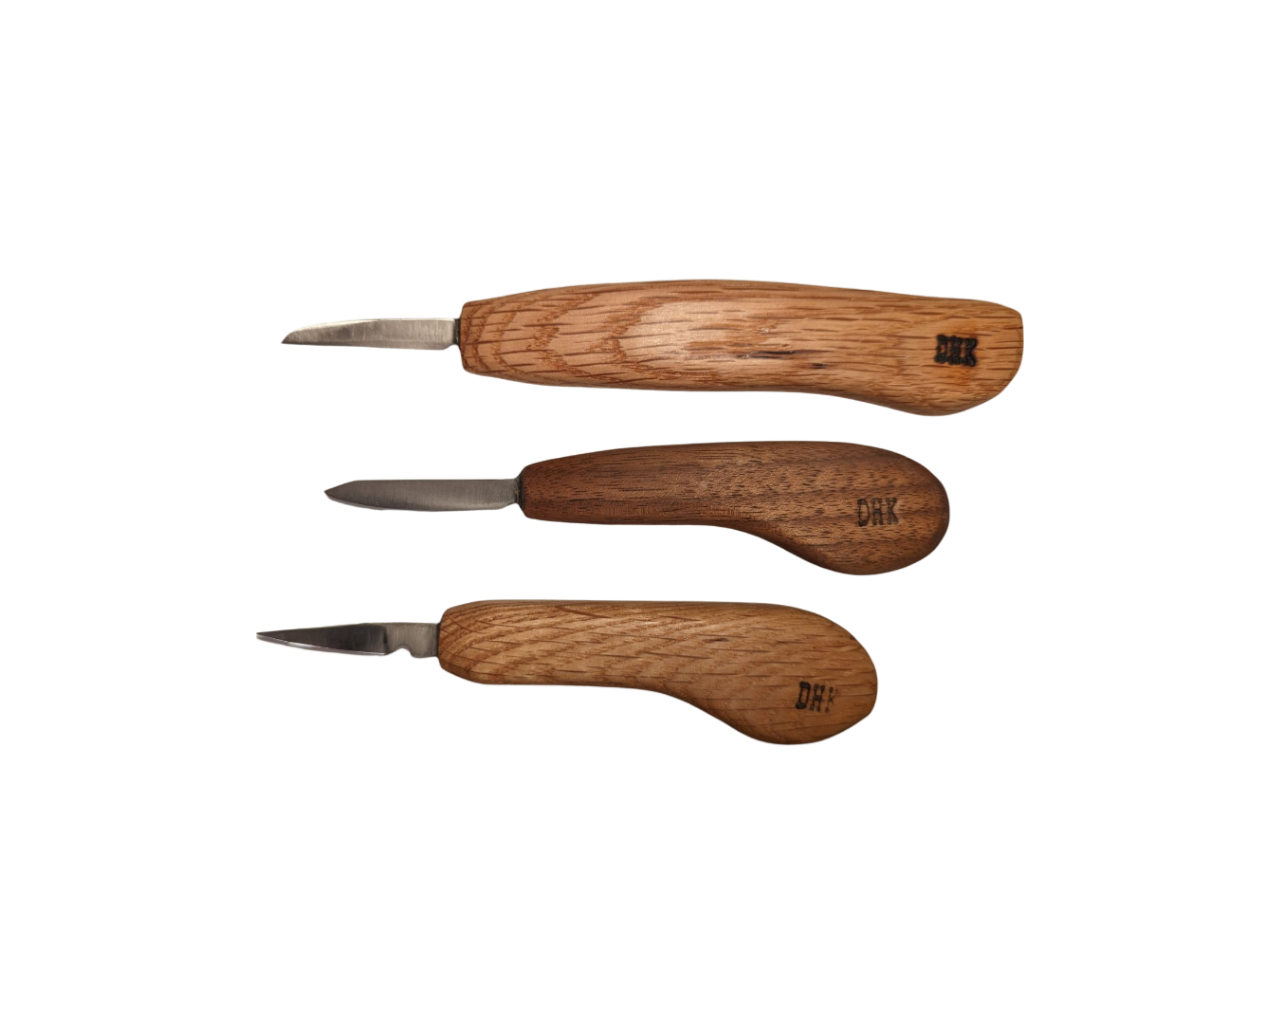 Hock Small Detail Carving Knife